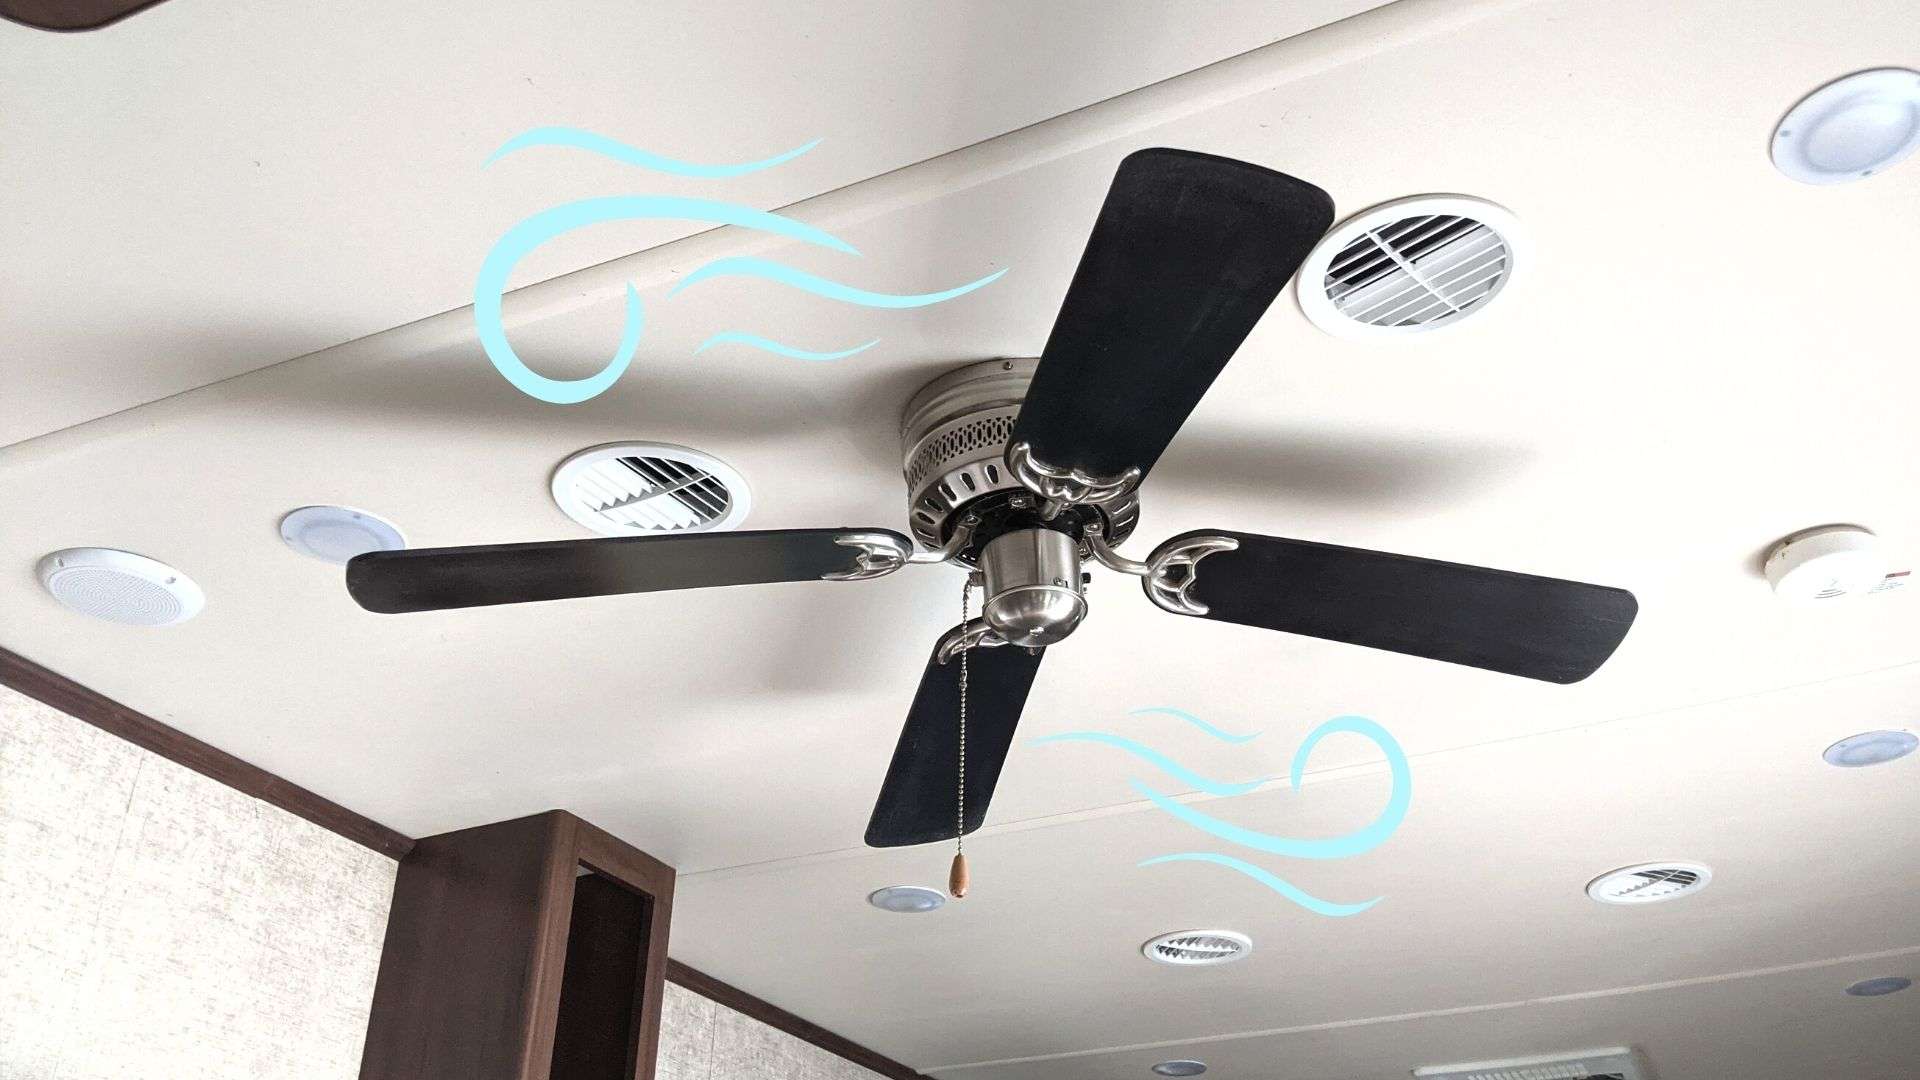 Get Great Air Flow With an RV Ceiling Fan